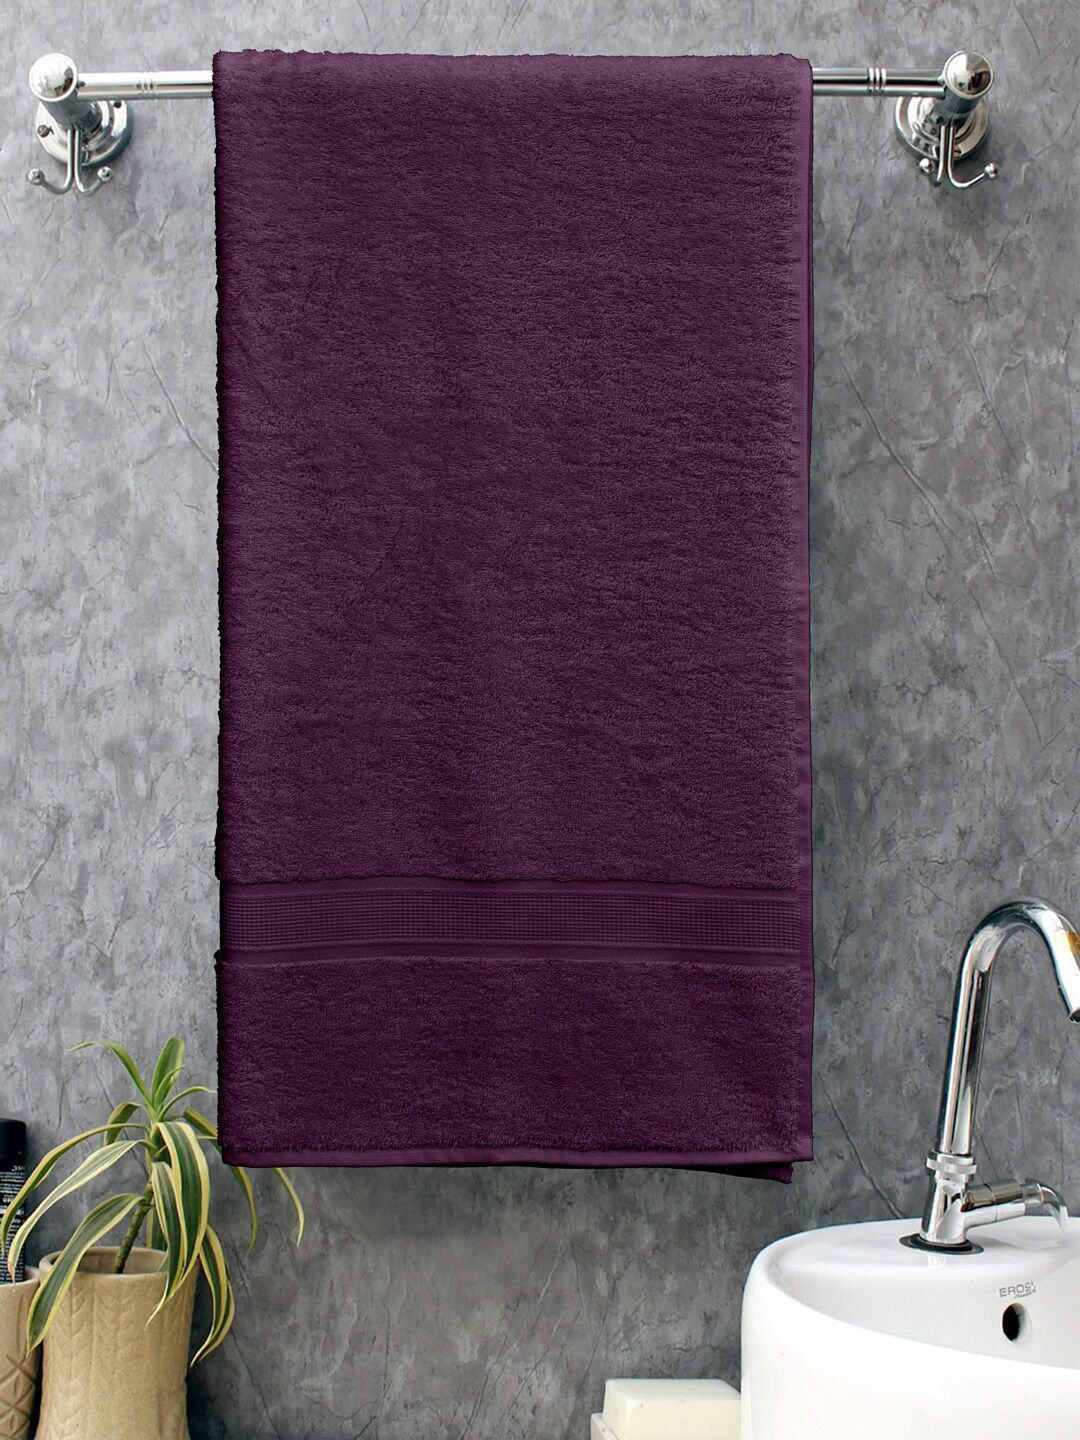 BOMBAY DYEING Purple Solid 550 GSM Cotton Bath Towel Price in India